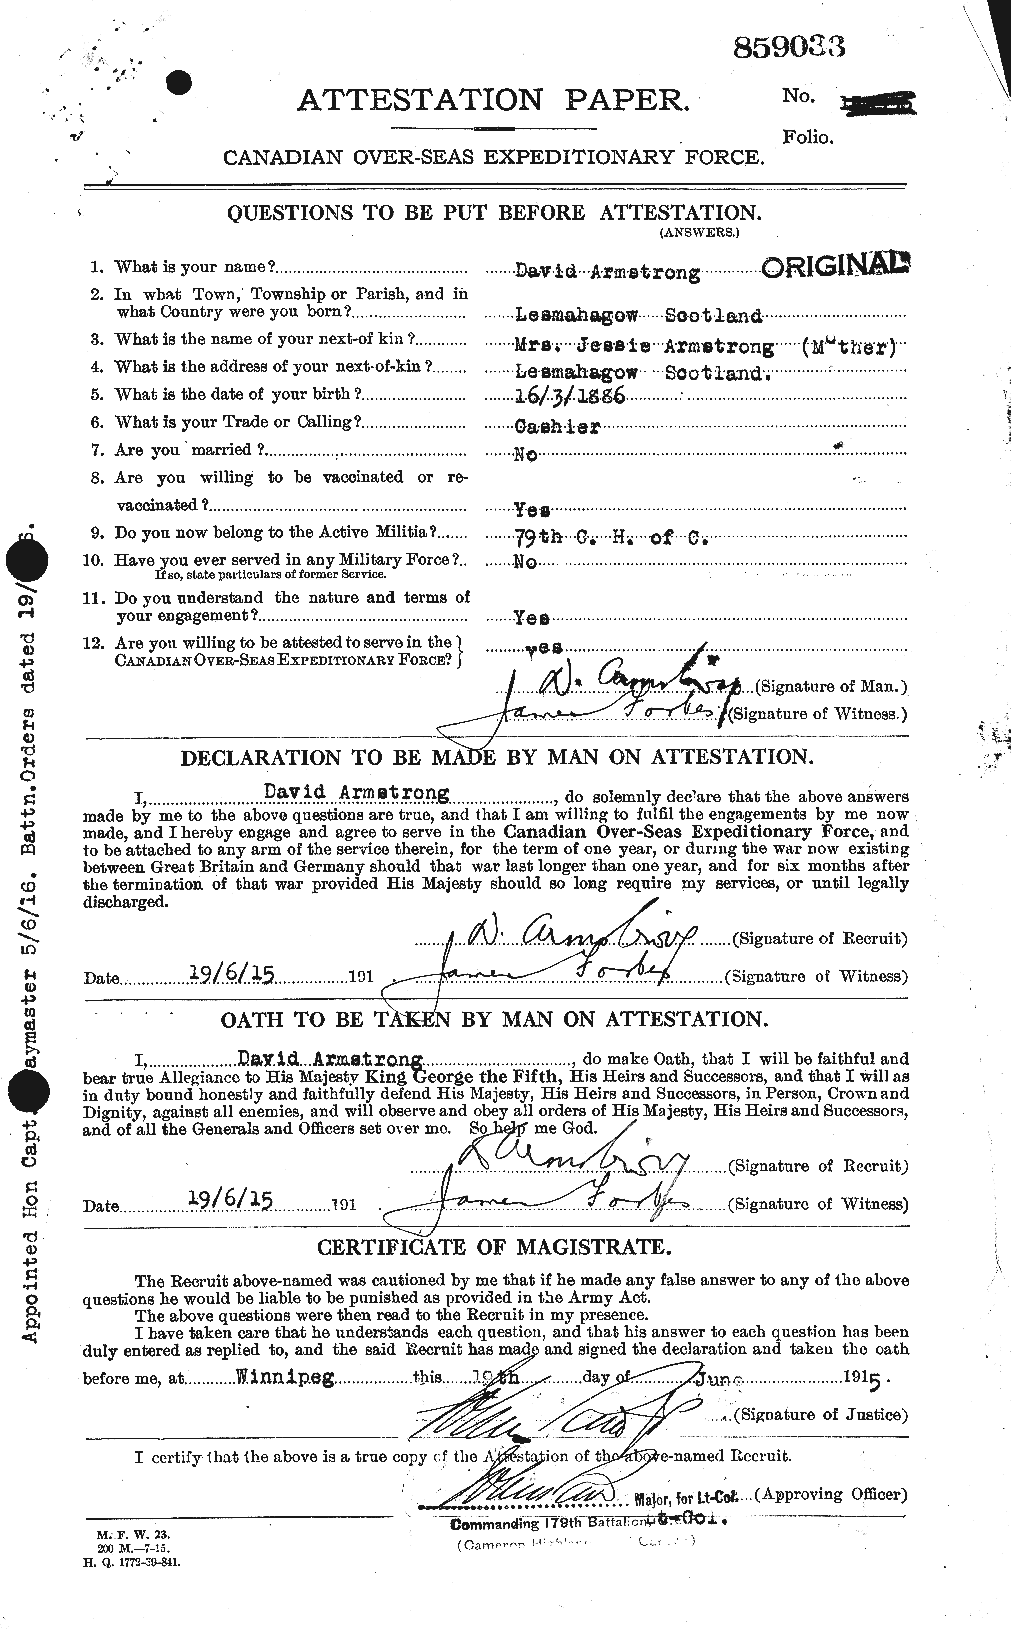 Personnel Records of the First World War - CEF 213861a